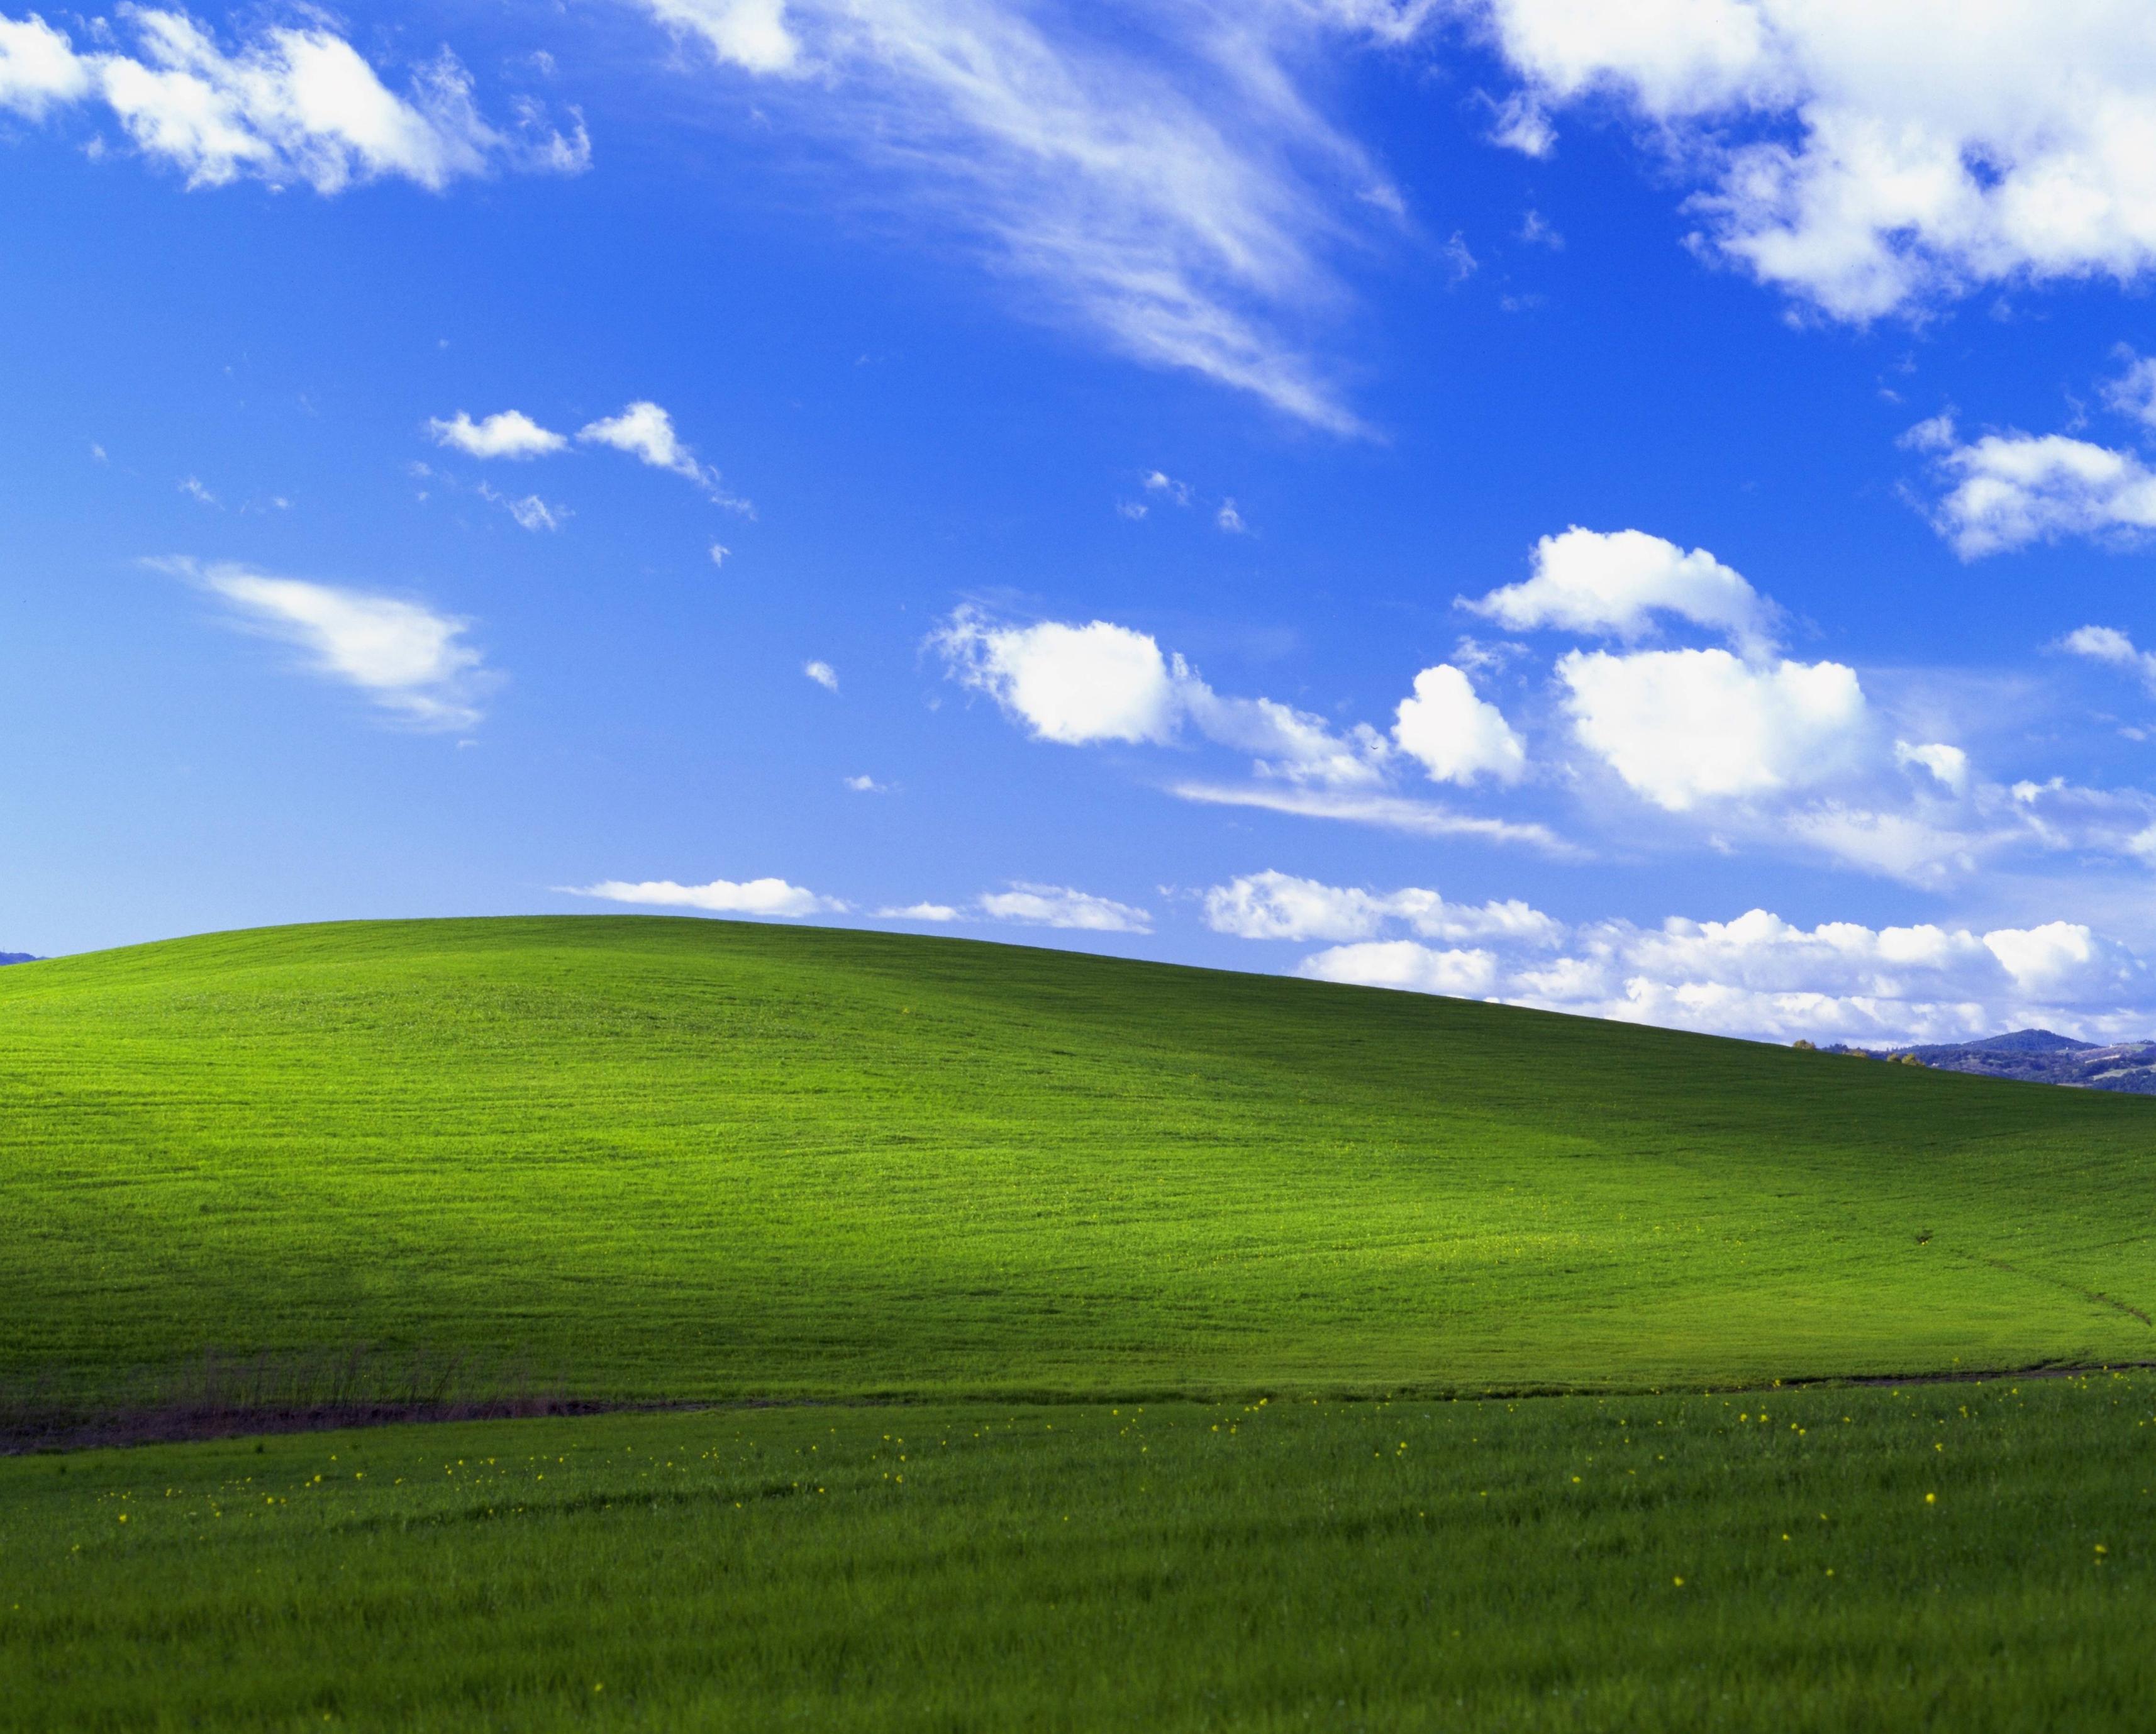 Windows 95 Widescreen Wallpaper - OS Customization, Tips and other